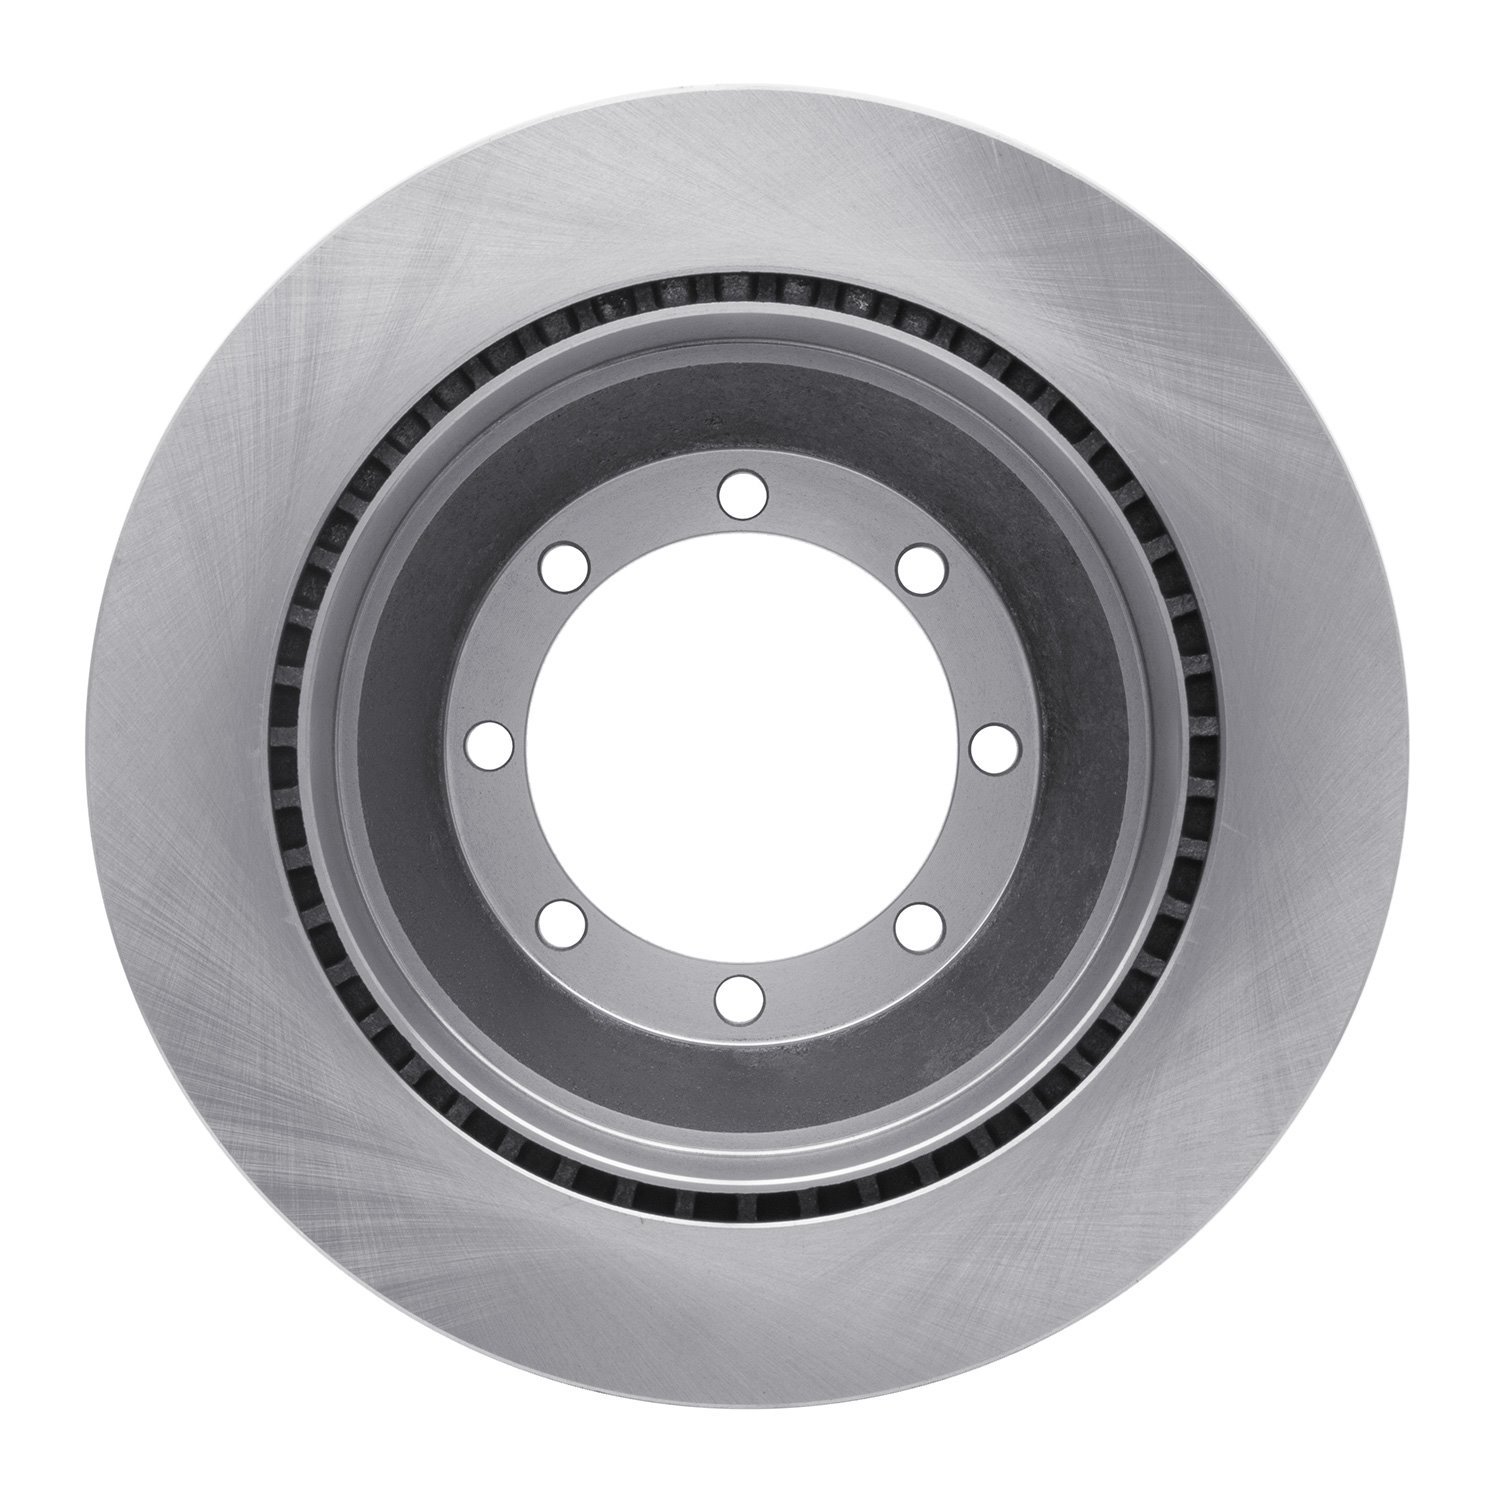 600-54212 Brake Rotor, Fits Select Ford/Lincoln/Mercury/Mazda, Position: Rr,Rear